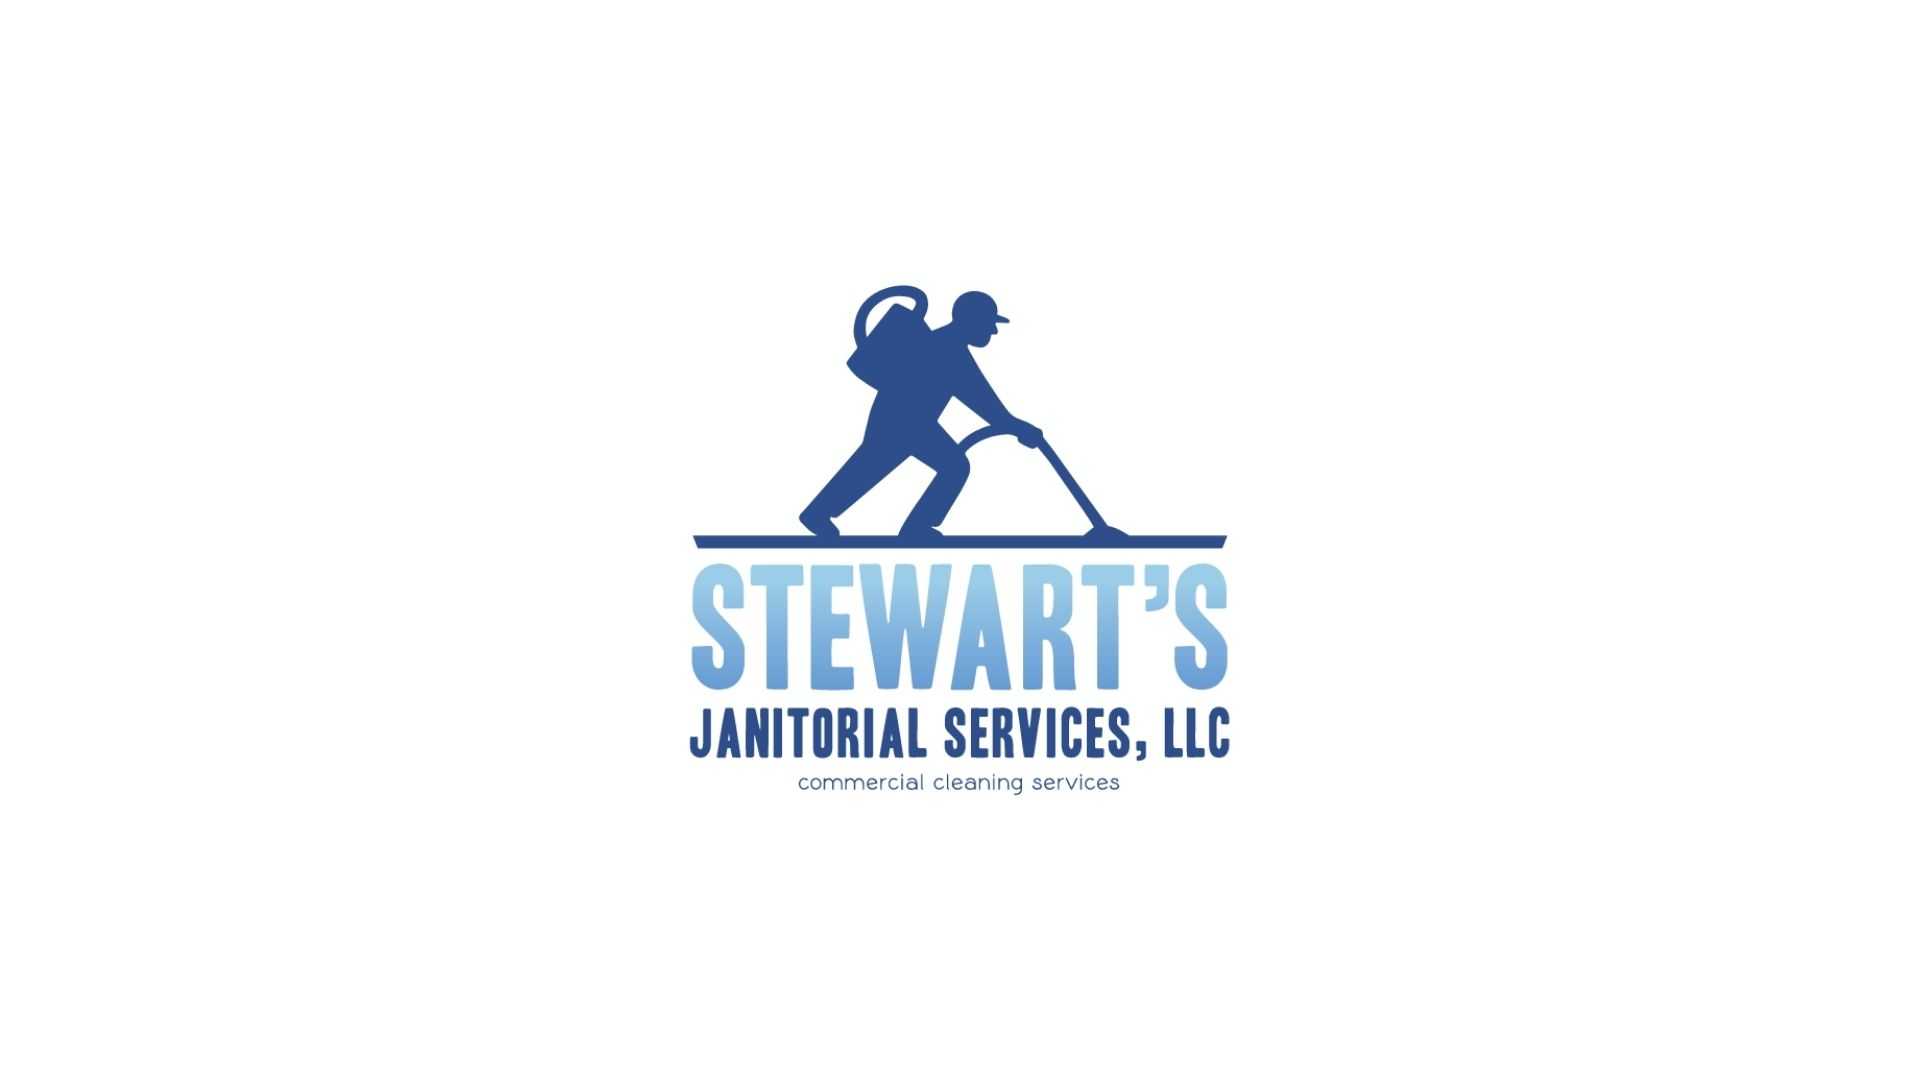 STEWART JANITORIAL SERVICES Profile Picture